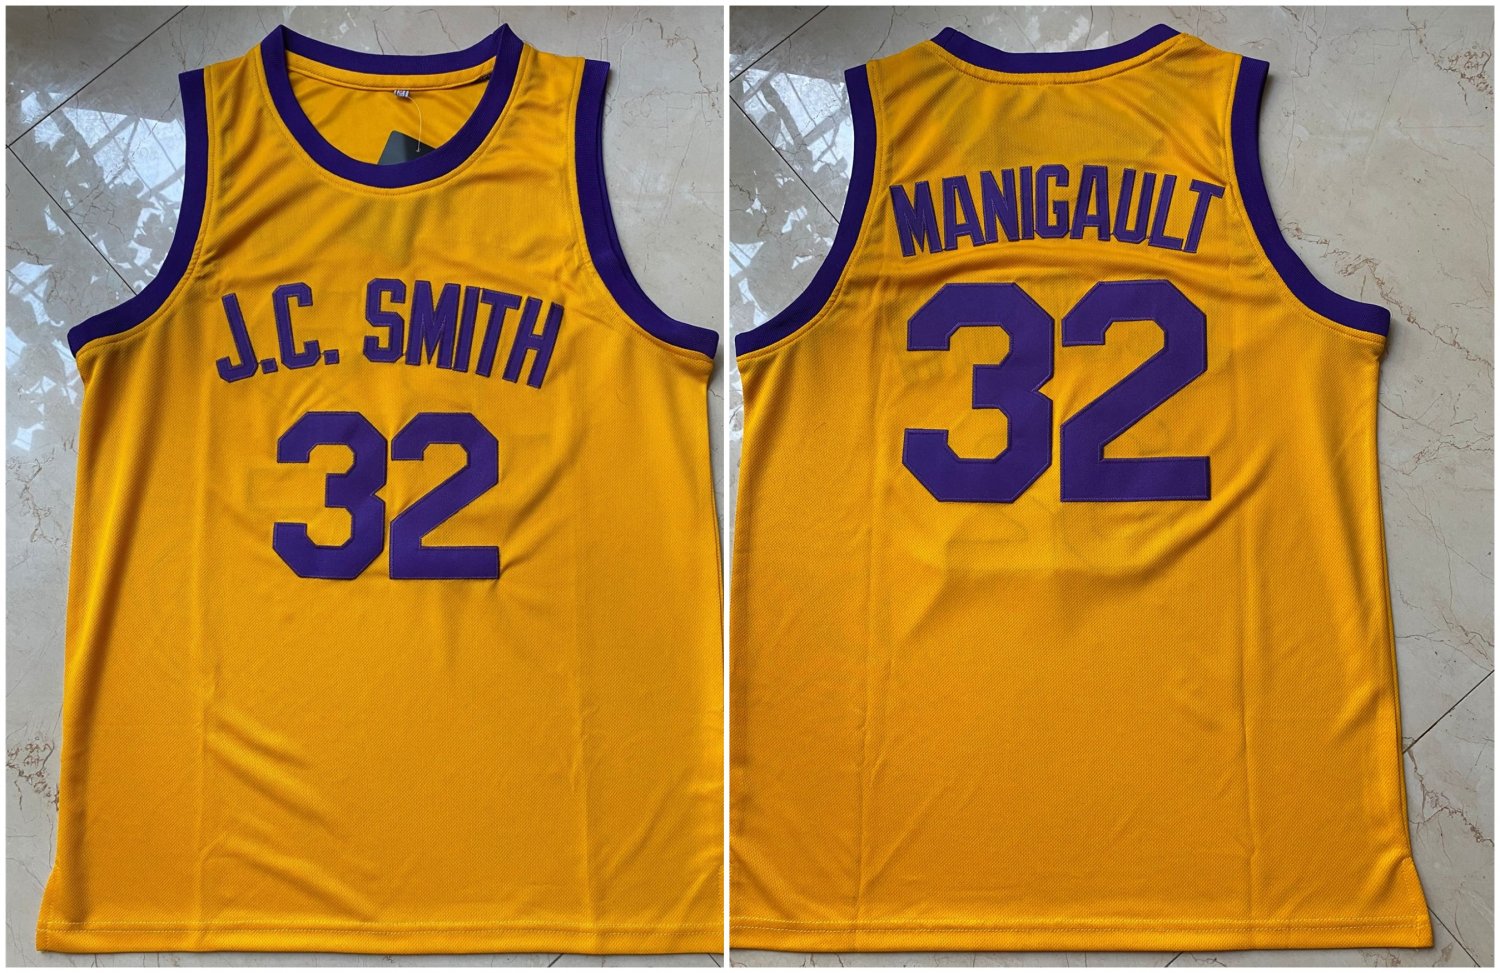 Smith #32 Earl Manigault College Moive Basketball Jersey Stitched Mens J.C